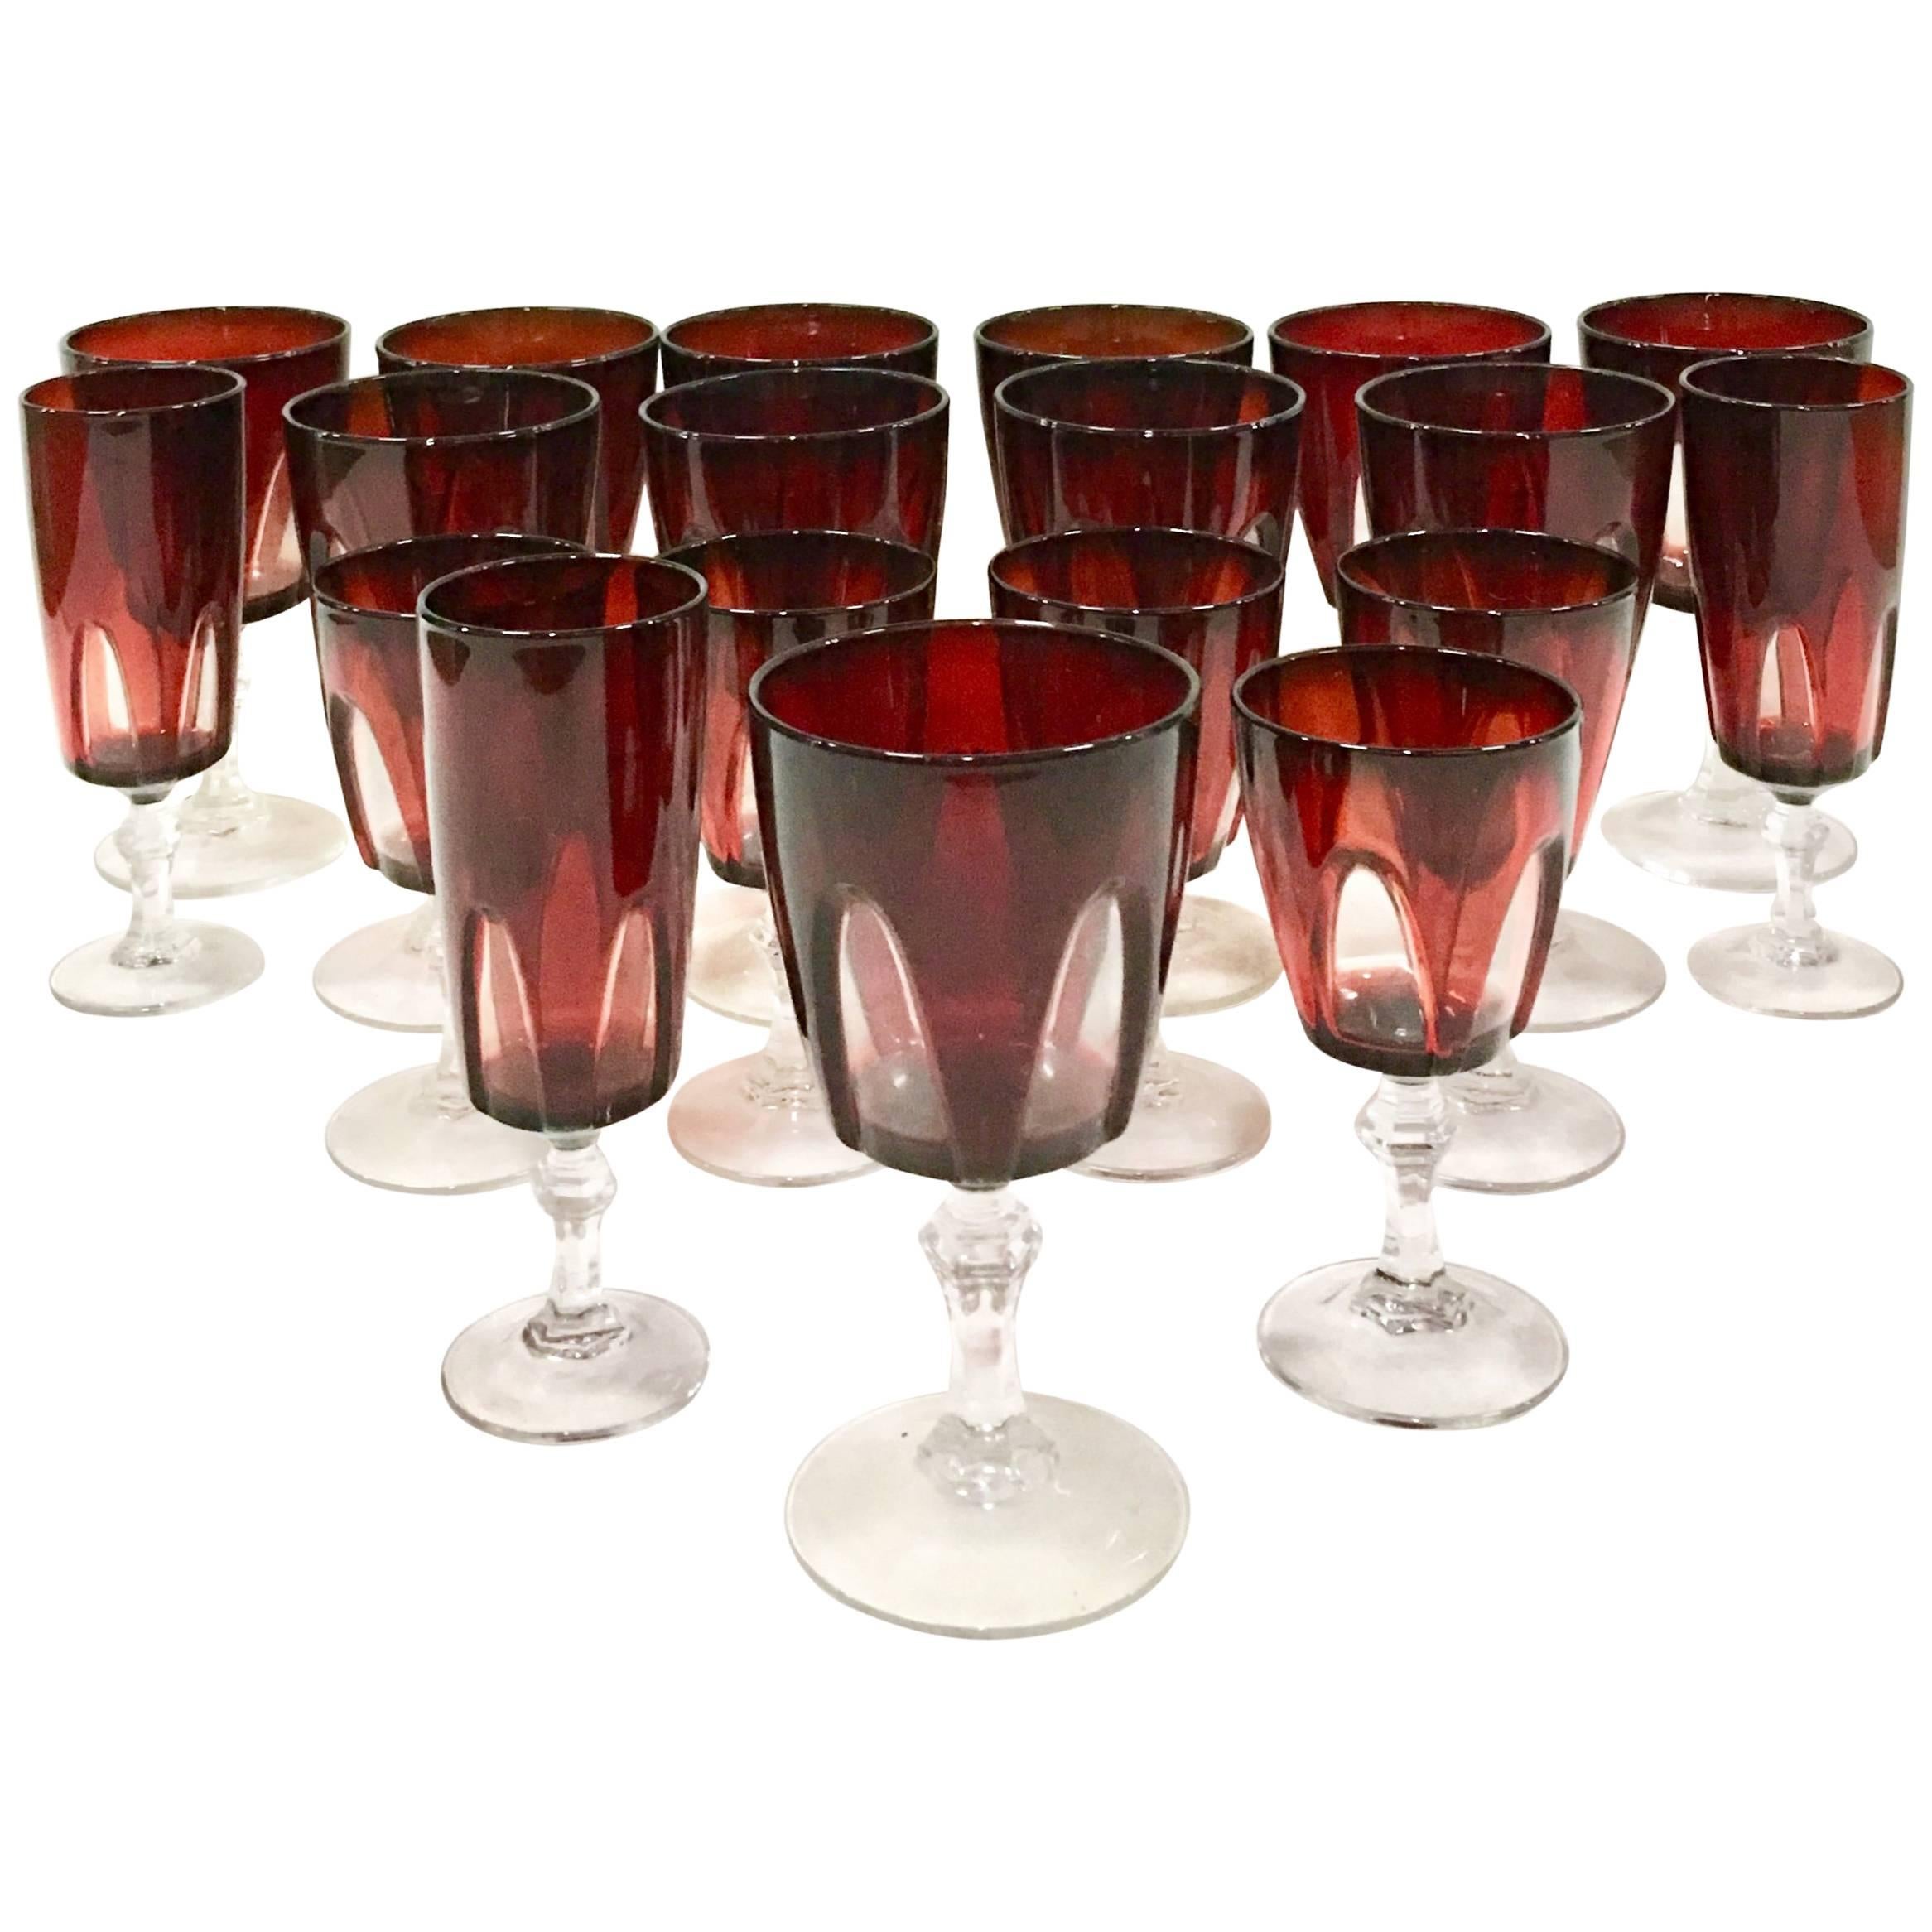 1970s French Cut Crystal Ruby Stem Drink Glasses S/18